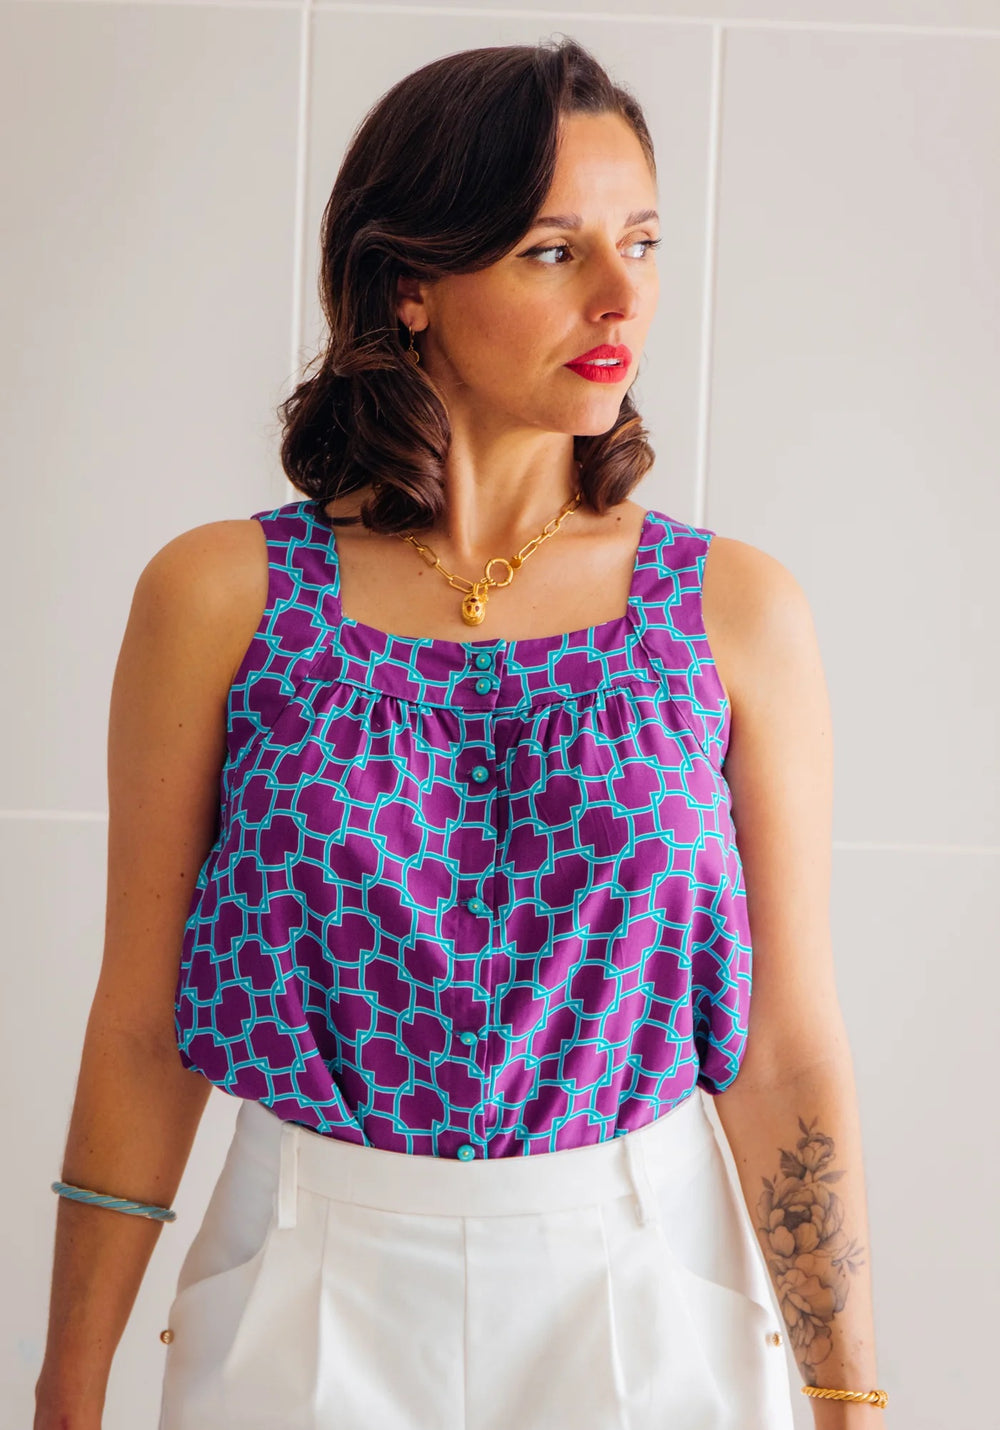 Woman wearing the Salto Top sewing pattern from Maison Fauve on The Fold Line. A top pattern made in cotton, viscose poplin, jacquard, viscose crepe, twills, tencel, or broderie anglaise fabrics, featuring a square neckline, sleeveless, broad shoulder str